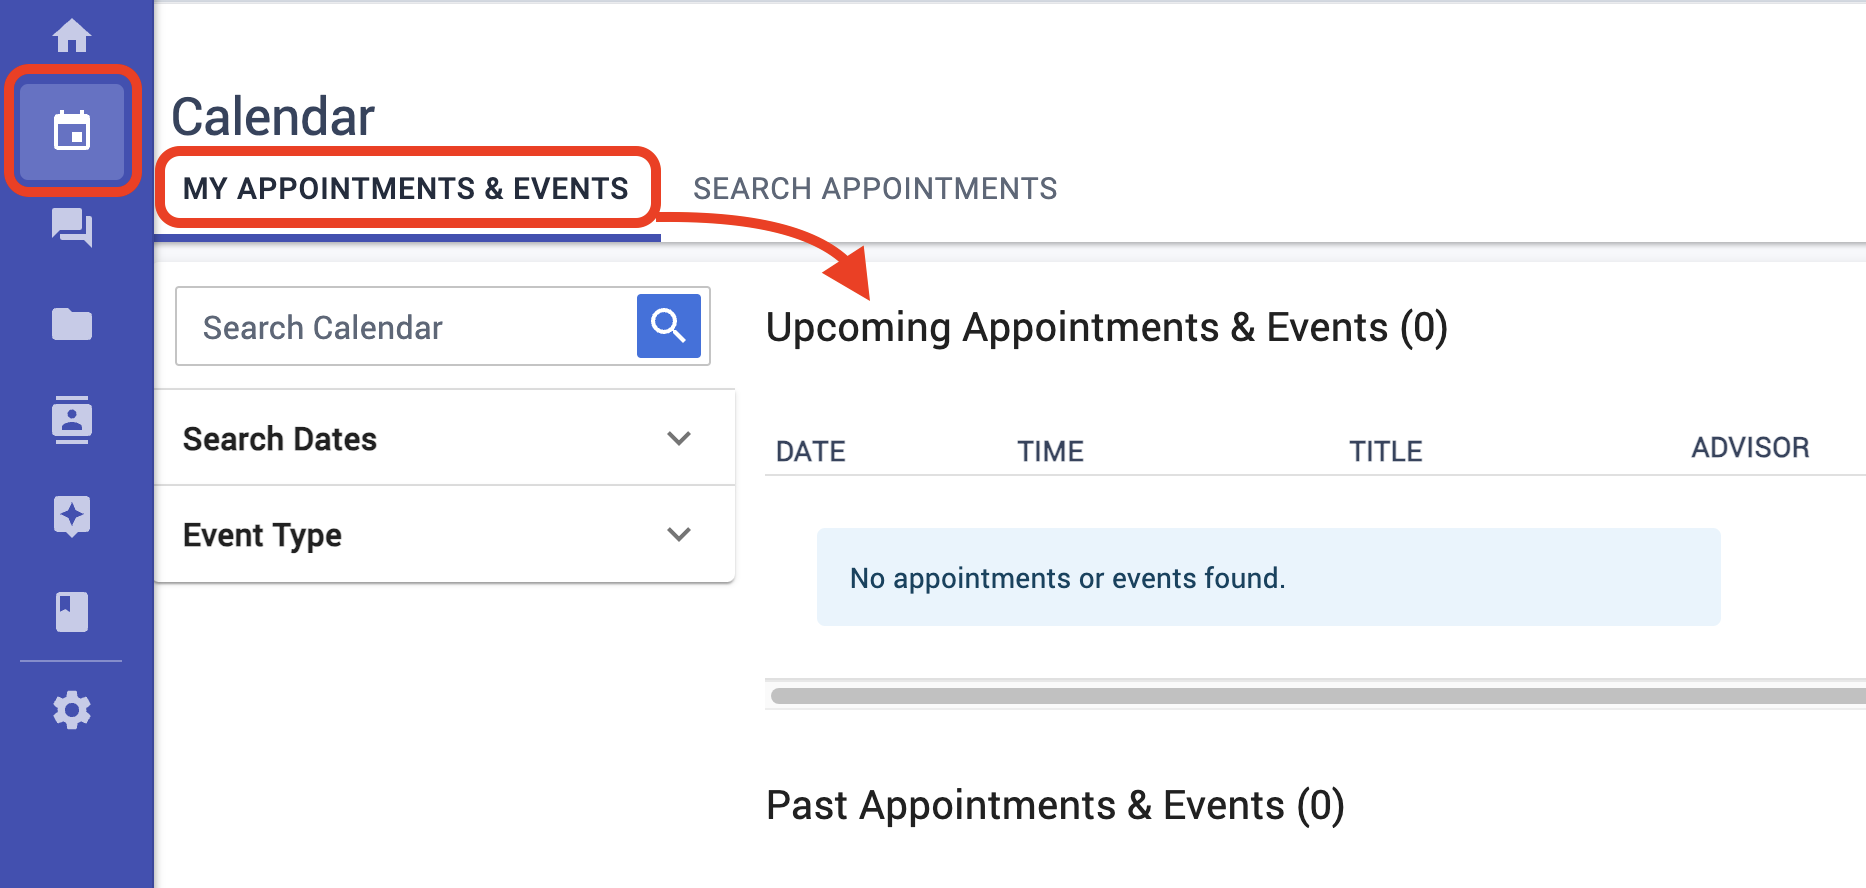 Upcoming appointments and events are listed at the top of the first tab